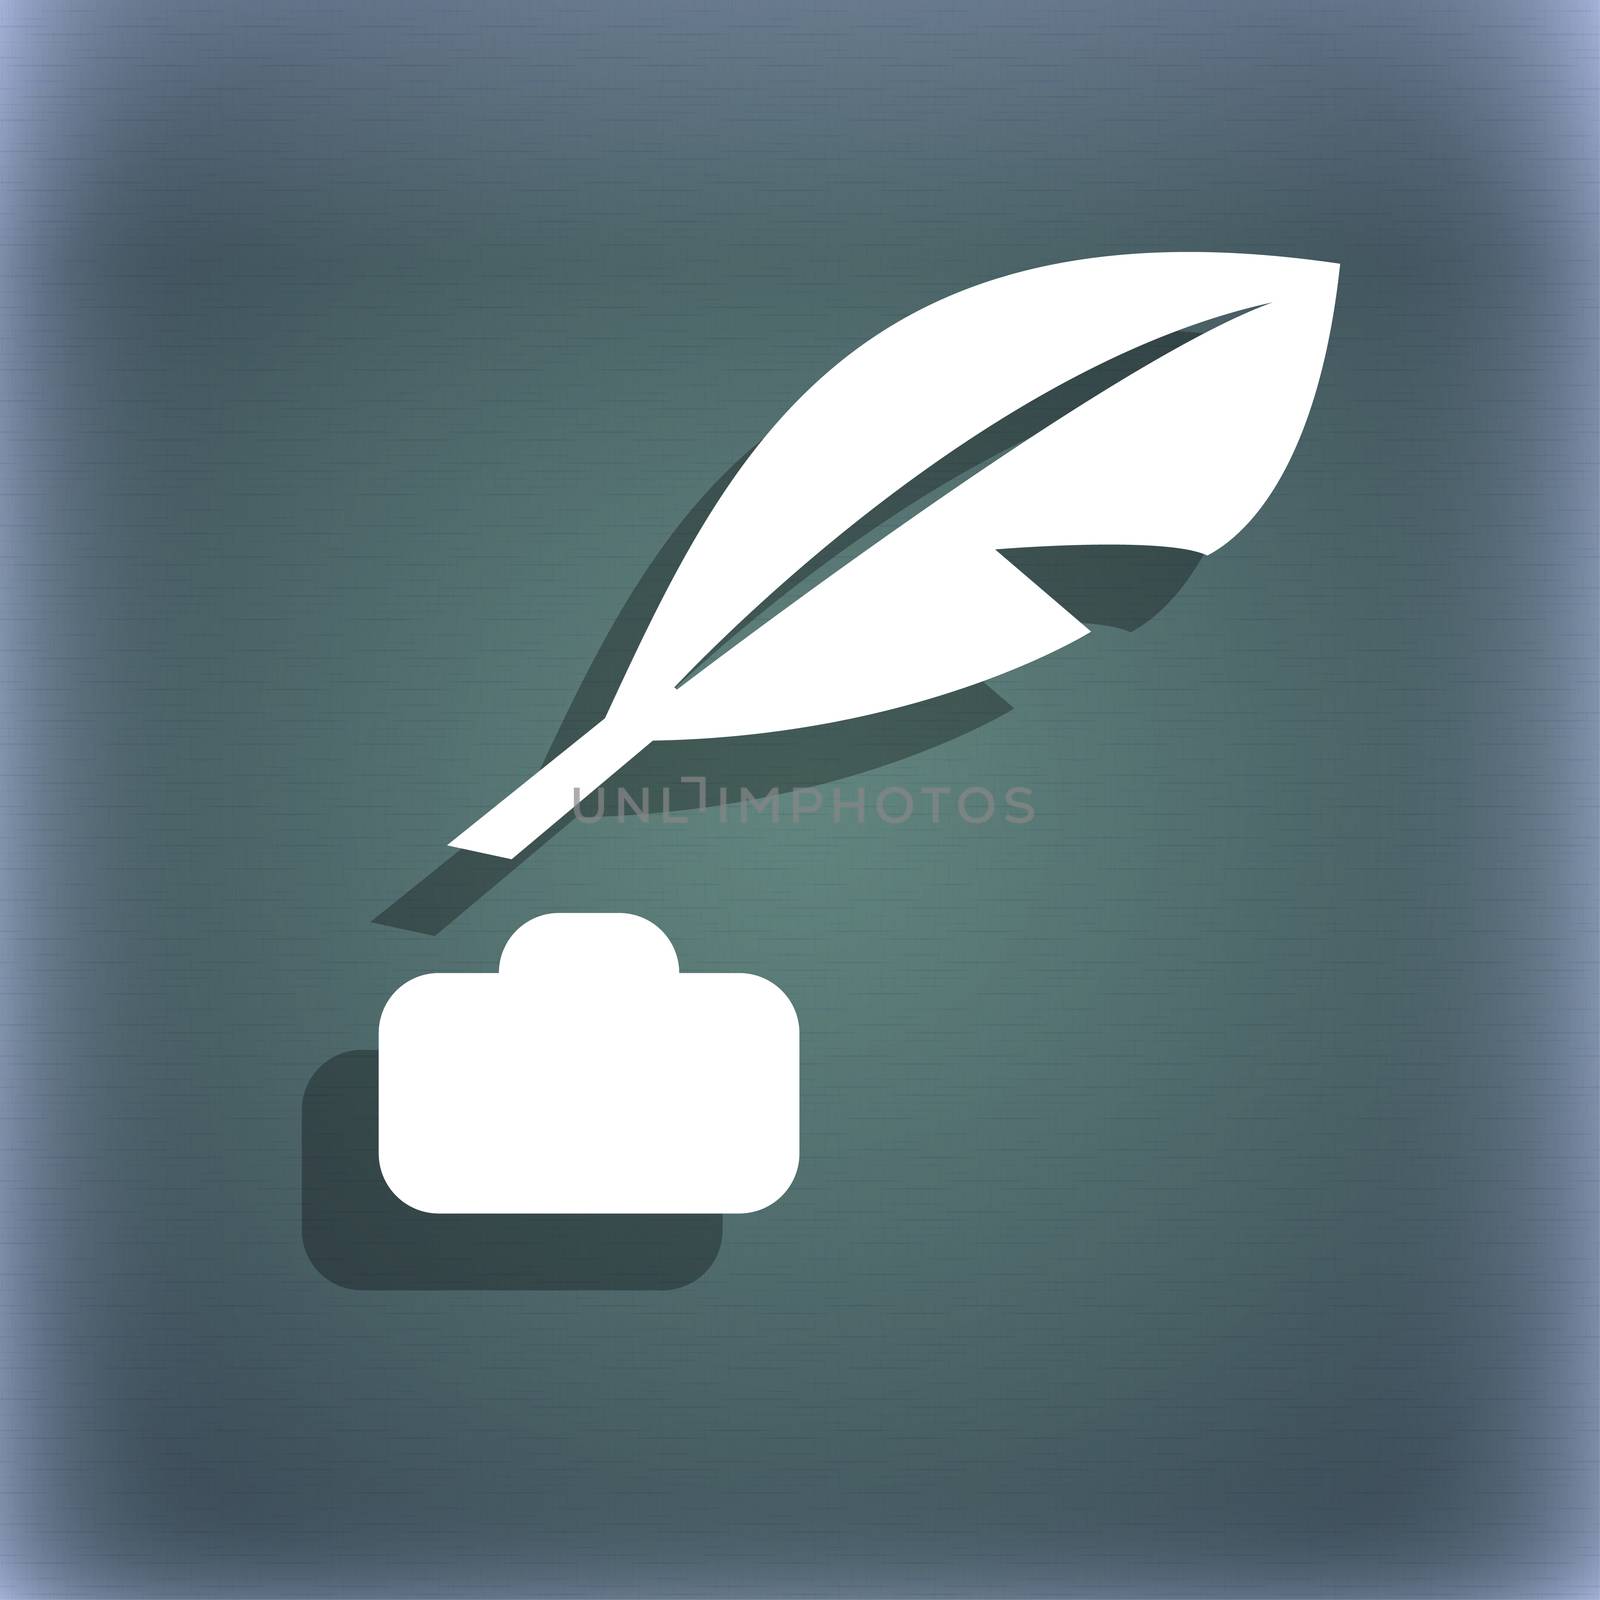 Feather, Retro pen icon symbol on the blue-green abstract background with shadow and space for your text.  by serhii_lohvyniuk